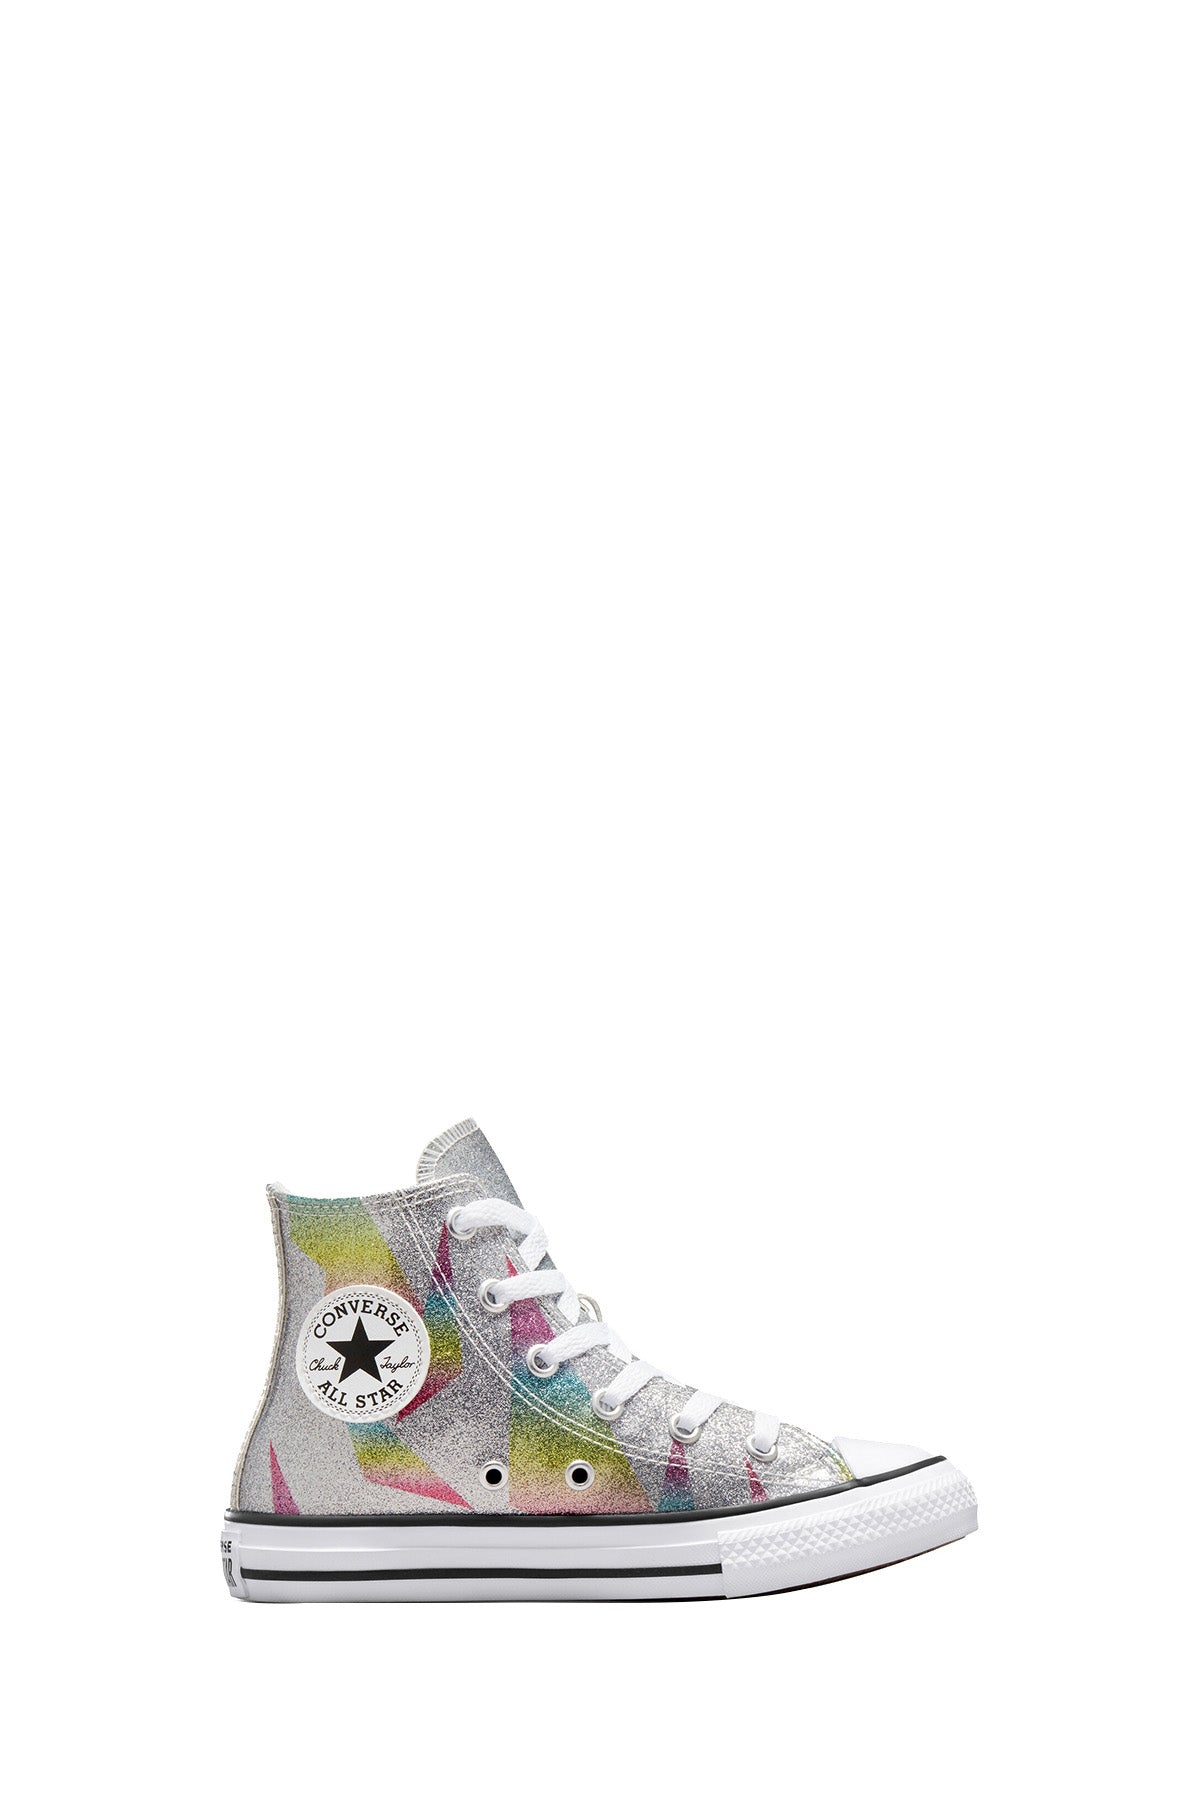 Sneakers Chuck Taylor All Star Prism Glitter Bambina Argento